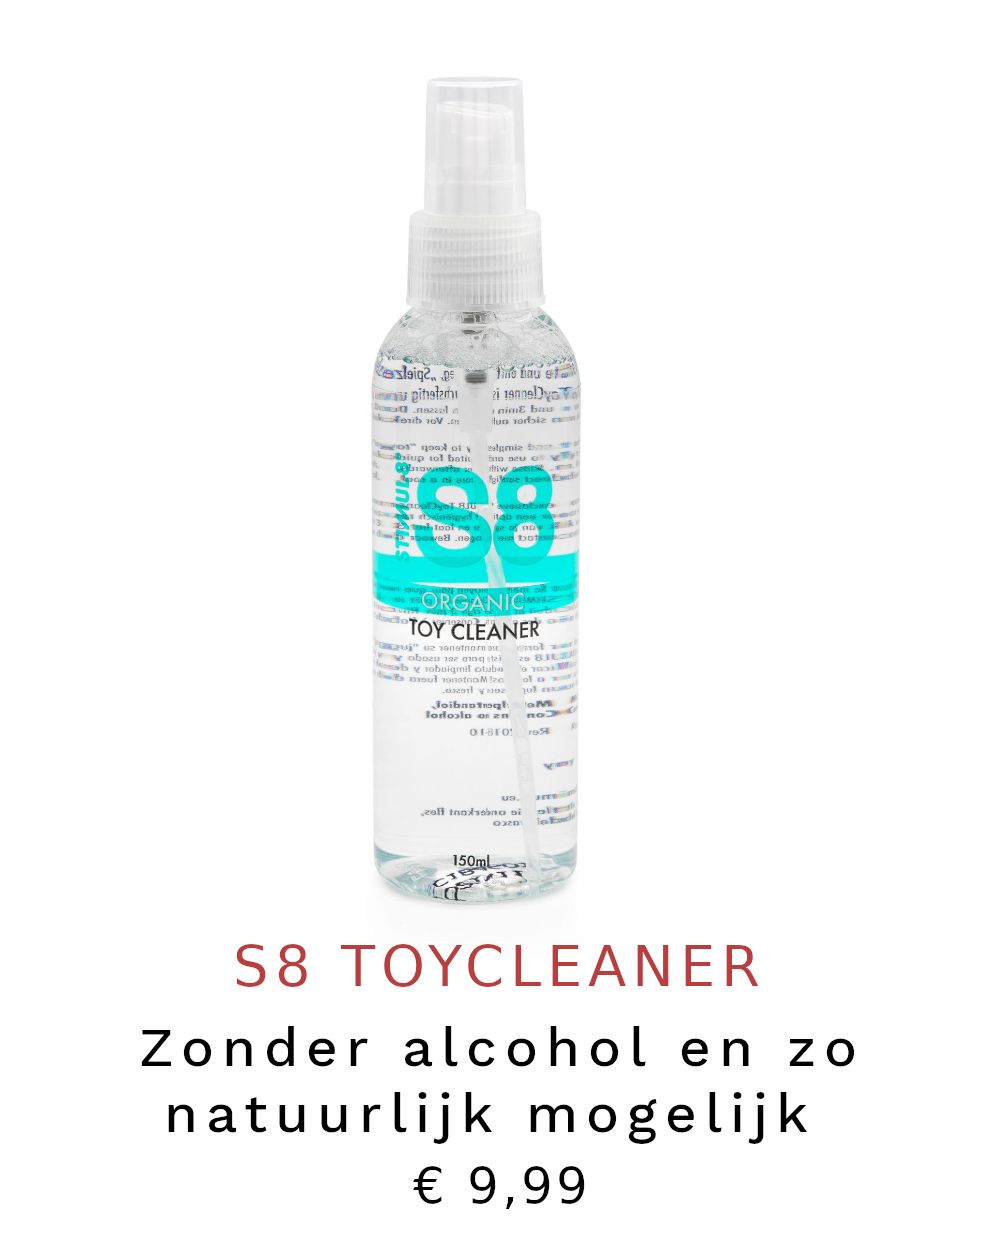 S8 Toycleaner